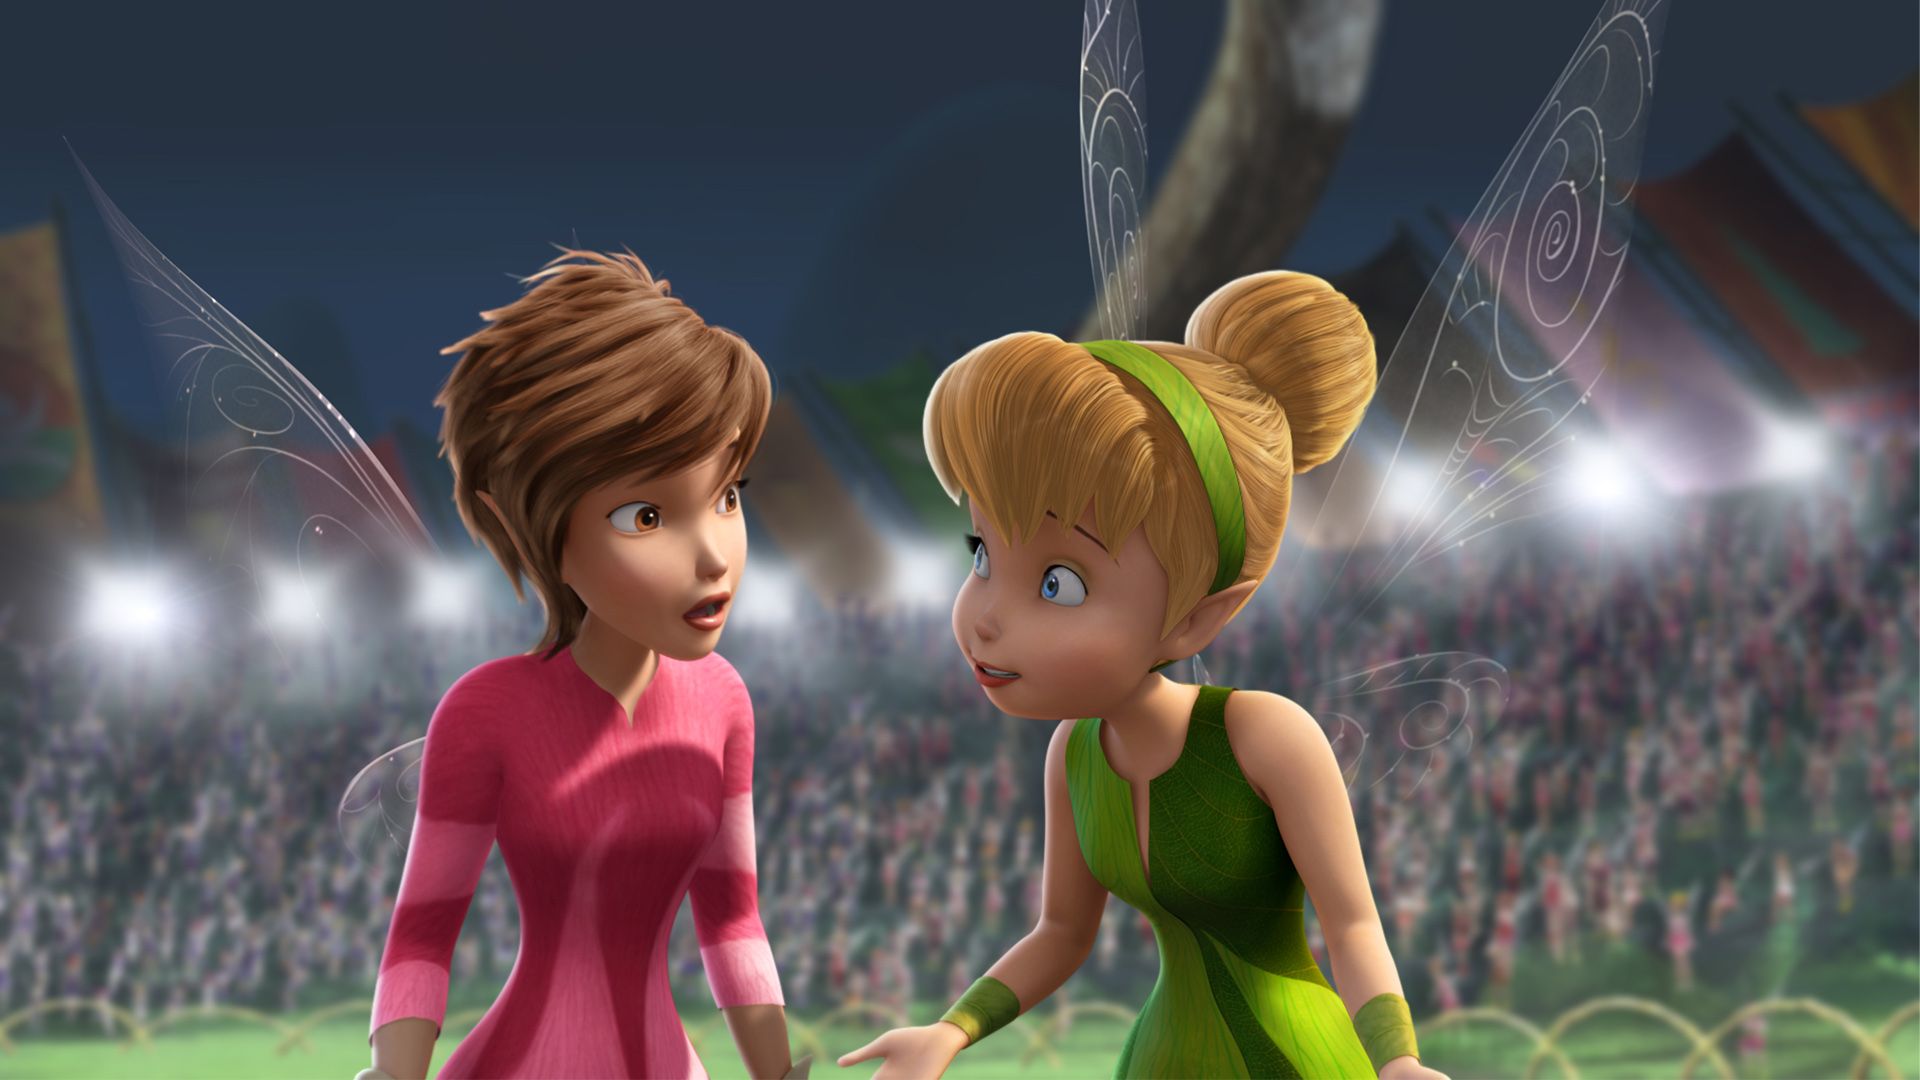 Pixie Hollow Games background